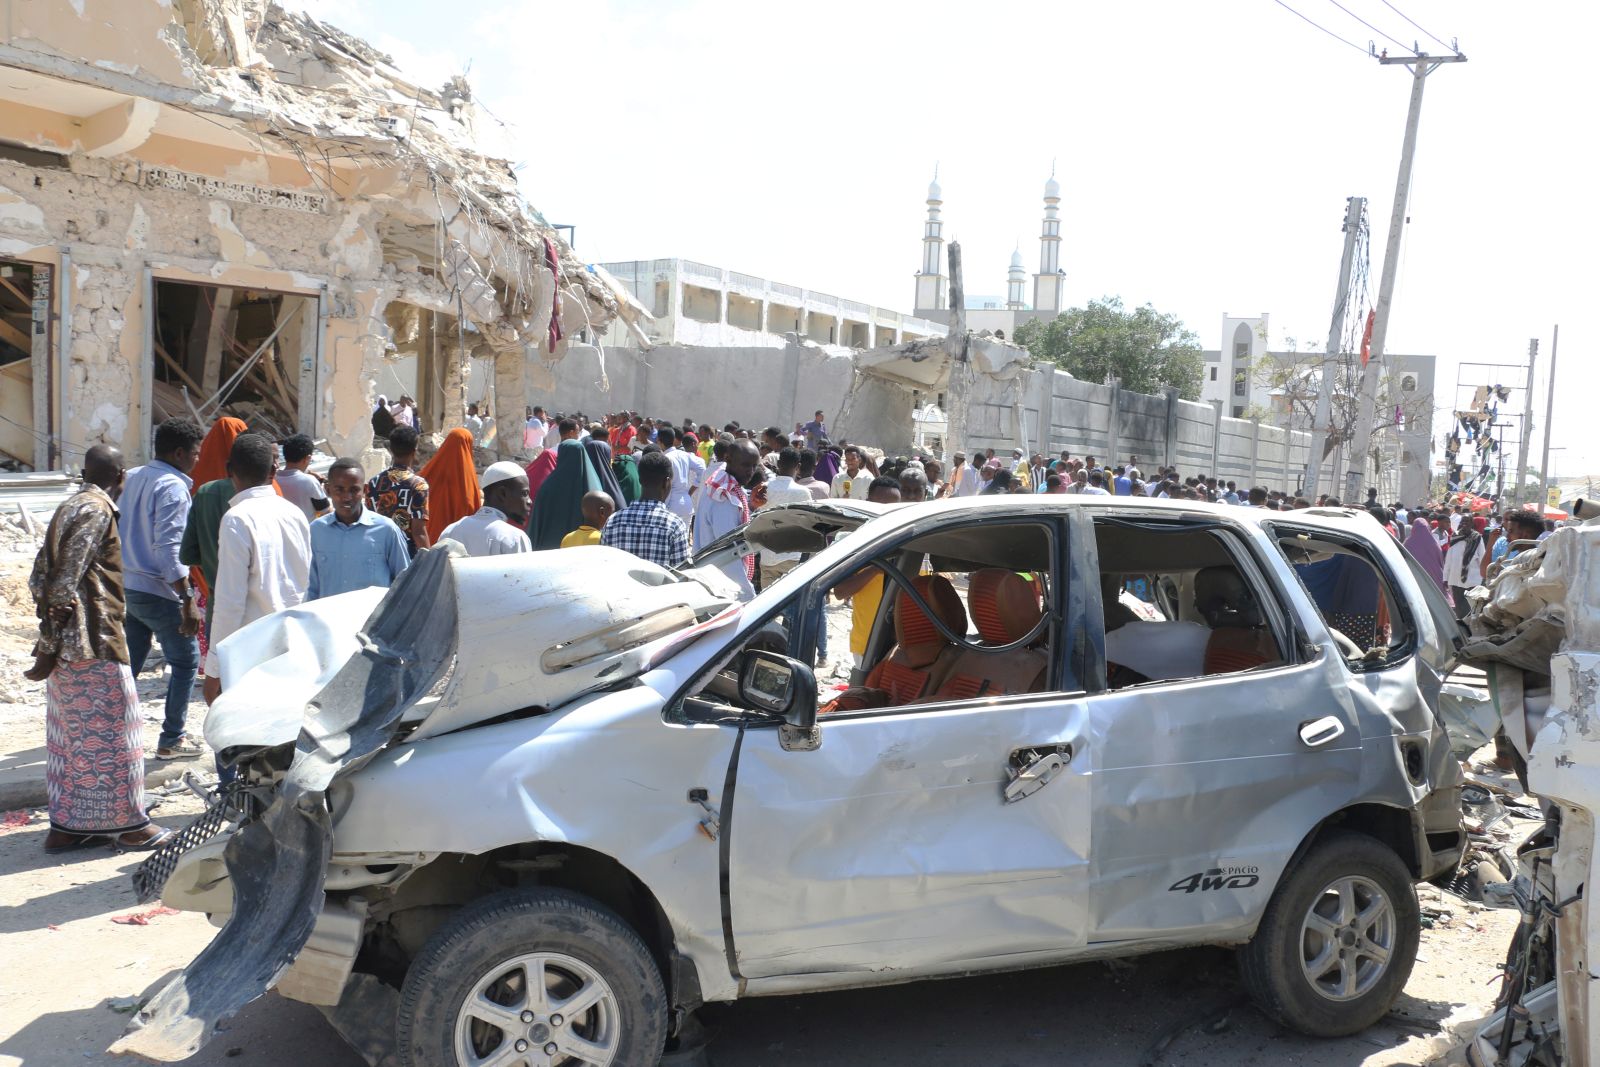 epa10274748 A damaged car in the aftermath of two explosions in Mogadishu, Somalia, 30 October 2022. At least 100 people were killed and over 300 were injured on 29 October, when two car bombs exploded at a busy junction near key government offices, Somali President Hassan Sheikh Mohamud said on 30 October during a media statement at the scene of the twin blasts. The attack occurred five years after a massive blast at the same location killed hundreds of people.  EPA/SAID YUSUF WARSAME